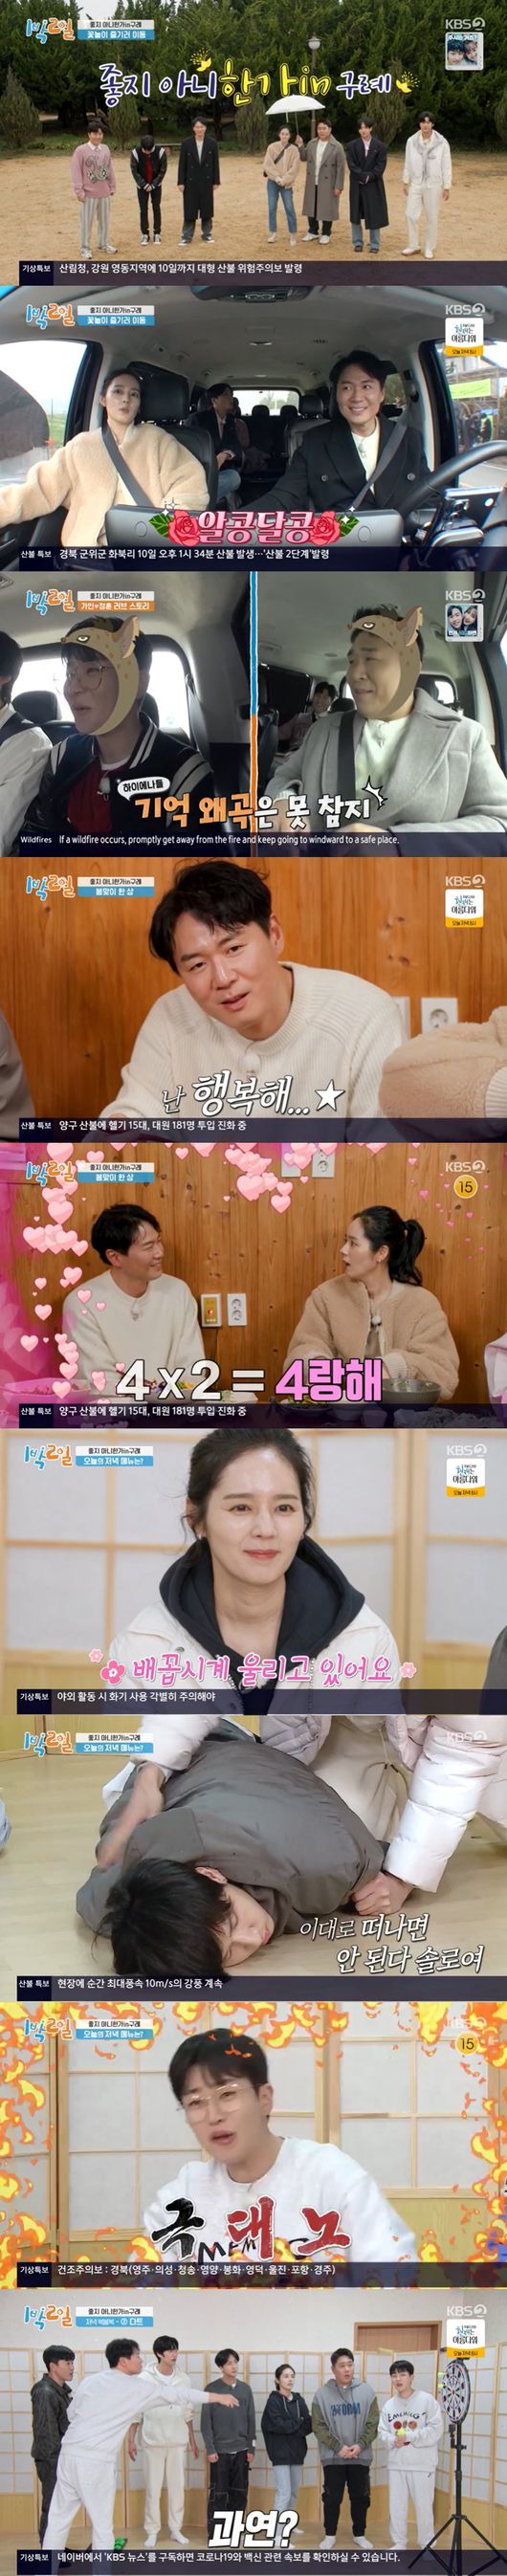 Han Ga-in dominated Sunday night with a lovely charm and extraordinary sense of entertainment.KBS 2TV Season 4 for 1 Night 2 Days (hereinafter referred to as 1 night and 2 days) which was broadcast at 6:30 pm on the 10th (Yesterday) took the top spot in the same time zone with 10.8% of TV viewer ratings (based on Nielsen Korea, All States furniture).Especially, when Han Ga-ins sitting down moment was the best TV viewer ratings per minute (based on Nielsen Korea, All States furniture), when the Hangane team Na In-woo dropped in the dart with the Bokbulbok Show in the evening, it became hot popularity.2049 TV viewer ratings also ranked first in the same time zone with 4.0% (Nilson Korea provided, based on the metropolitan area furniture), filling the A house theater with fun and excitement on Sunday evening.Yesterdays show featured a sweet salvage spring trip with Tteam couple Yeon Jung-hoon and Han Ga-in.On this day, Han Ga-in grabbed the members hearts with an exciting Yeon Jung-hoons Confessions sledding.At the time of filming the drama Yellow Handkerchief, Yeon Jung-hoon used the payment for the dinner with Han Ga-in and carried out a subtle operation.Han Ga-in said, Yeon Jung-hoon did not tell me to date.I was talking like a worm, and I got together. Ravi admired his skillful love skills, saying, Fox Fox! Also, when Han Ga-in was close to Yeon Jung-hoons family and married in a row, DinDin said, We should make a marriage company this way.The lunch Bokbulbok Show was a Speak with Your Body showdown on drama and film.Yeon Jung-hoon, who showed his passion as he conceded to the order decision, was defeated by the momentum of the Han Ga-in, Moon Se-yoon, Ravi, Na In-woo team, which showed a watered teamwork.The reason for the explosion of the members of the team Yeon Jung-hoon, Kim Jong-min, and DinDin, but Yeon Jung-hoon made them hold the navel of those who see it as a real husband relieved by his wifes happy ending.At lunch, Han Ga-in and Hangane team enjoyed a rich spring herb menu that snipped their tastes properly, but the losers were distressed by eating a bitter taste of flower bibimbap.So the match between Han Ga-in and the spring herbs is concluded.As Yeon Jung-hoons turn approached, Han Ga-in prepared his favorite fireplace, and he deliberately made a cute operation to wrong the problem and gave a smile to the viewers.In the last Absolute Sound game, Na In-woo, who won the unexpected throne with a different rhythm, laughed at everyone and finished the meal warmly.In the base camp where the picturesque hanok was located, the Yeon Jung-hoon and Han Ga-in had a good time dating together.Kim Jong-min, who watched them, said, I do not feel envious. But I felt one thing. It was like one, not two.When the Bokbulbok Show began here with a set of three sets of Han Ga-ins beloved crab dishes, Yeon Jung-hoon said, I have not eaten my wife.Ill buy you guys (the songa team) later, he said, proving the aspect of his unfavorable want for his wife.Han Ga-in was the first to be eliminated from the strawberry game, but he showed excellent ability in the darts that he challenged for the first time in his life.After a big match that was overwhelmed, I was more excited about the next weeks broadcast.As such, 1 night and 2 days together with the affectionate Tang couple made an unusual trip.In particular, Yeon Jung-hoon has a hearty anecdote that he had fallen in love with Han Ga-in, who was a toaster, and unlike her usual big brother, she boasted a charm of reversal that asked her everything from one to ten.Han Ga-in recalled the early marriage days of his charming marriage and showed off the aspect of love-man and raised the desire of viewers to love.The Koreas representative Real Wild Road Variety Season 4 for 1 Night 2 Days is broadcast every Sunday at 6:30 pm.2 Days & 1 Night